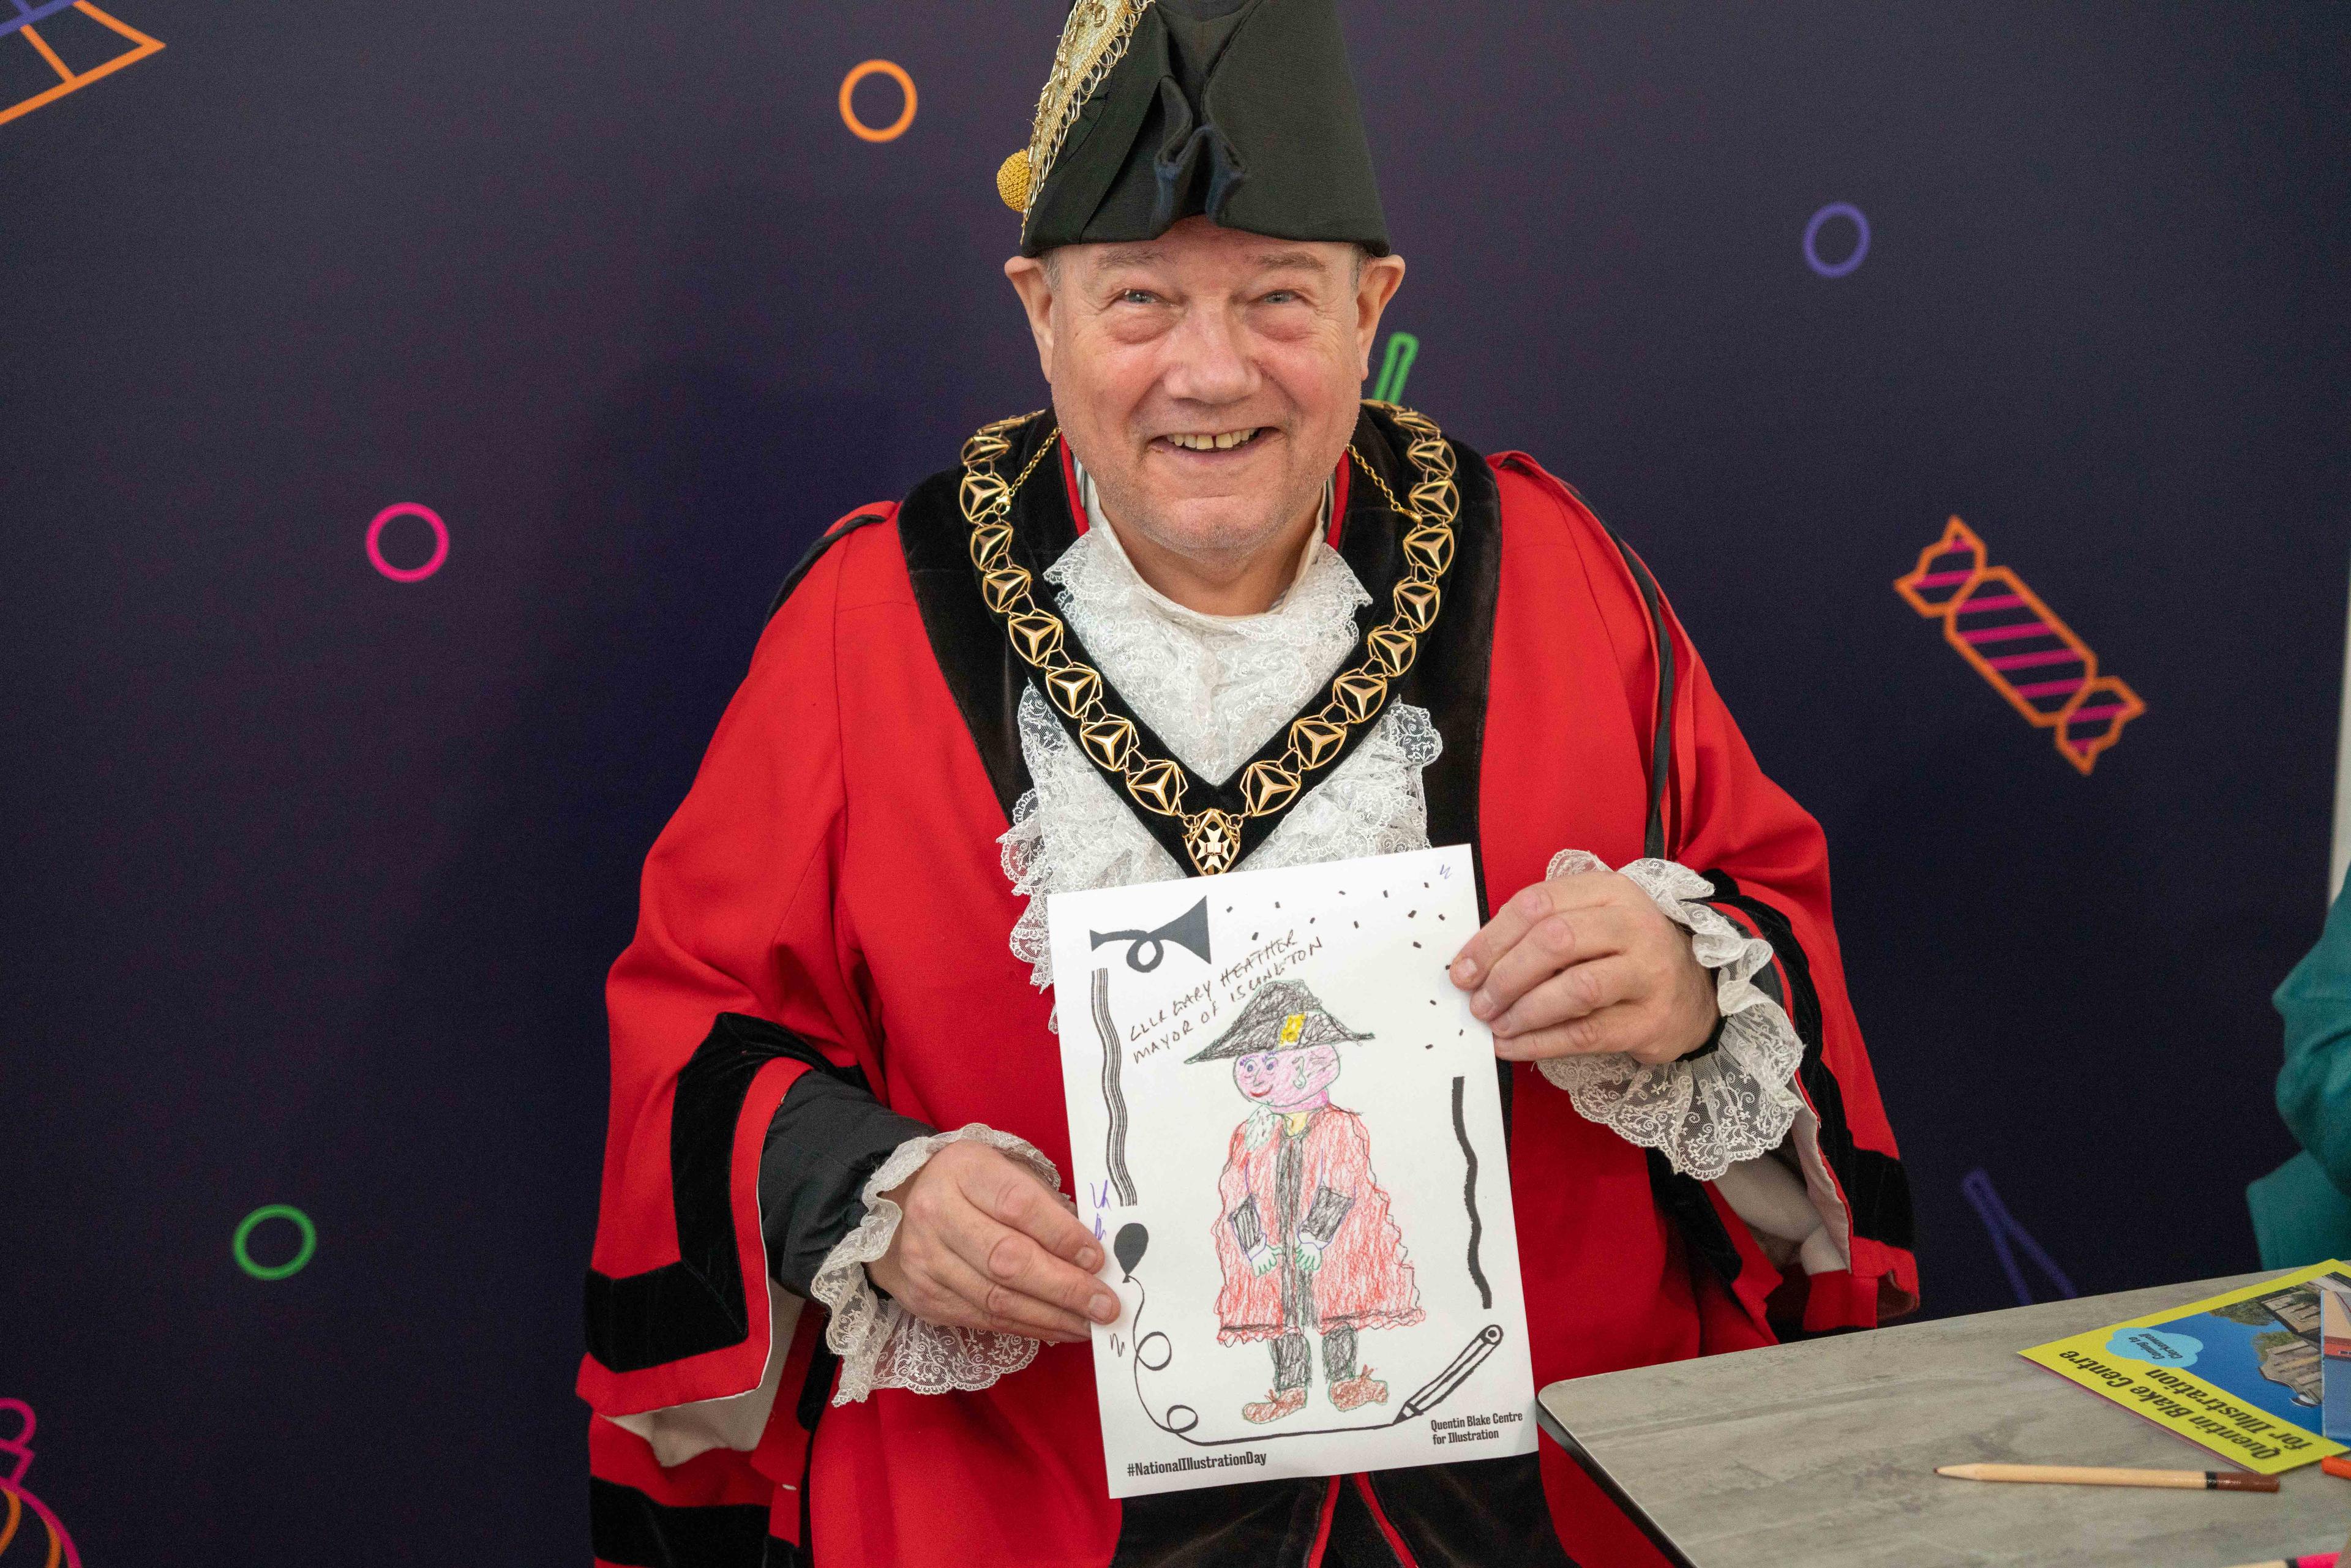 Photograph of the Mayor of Islington holding an illustration of himself.